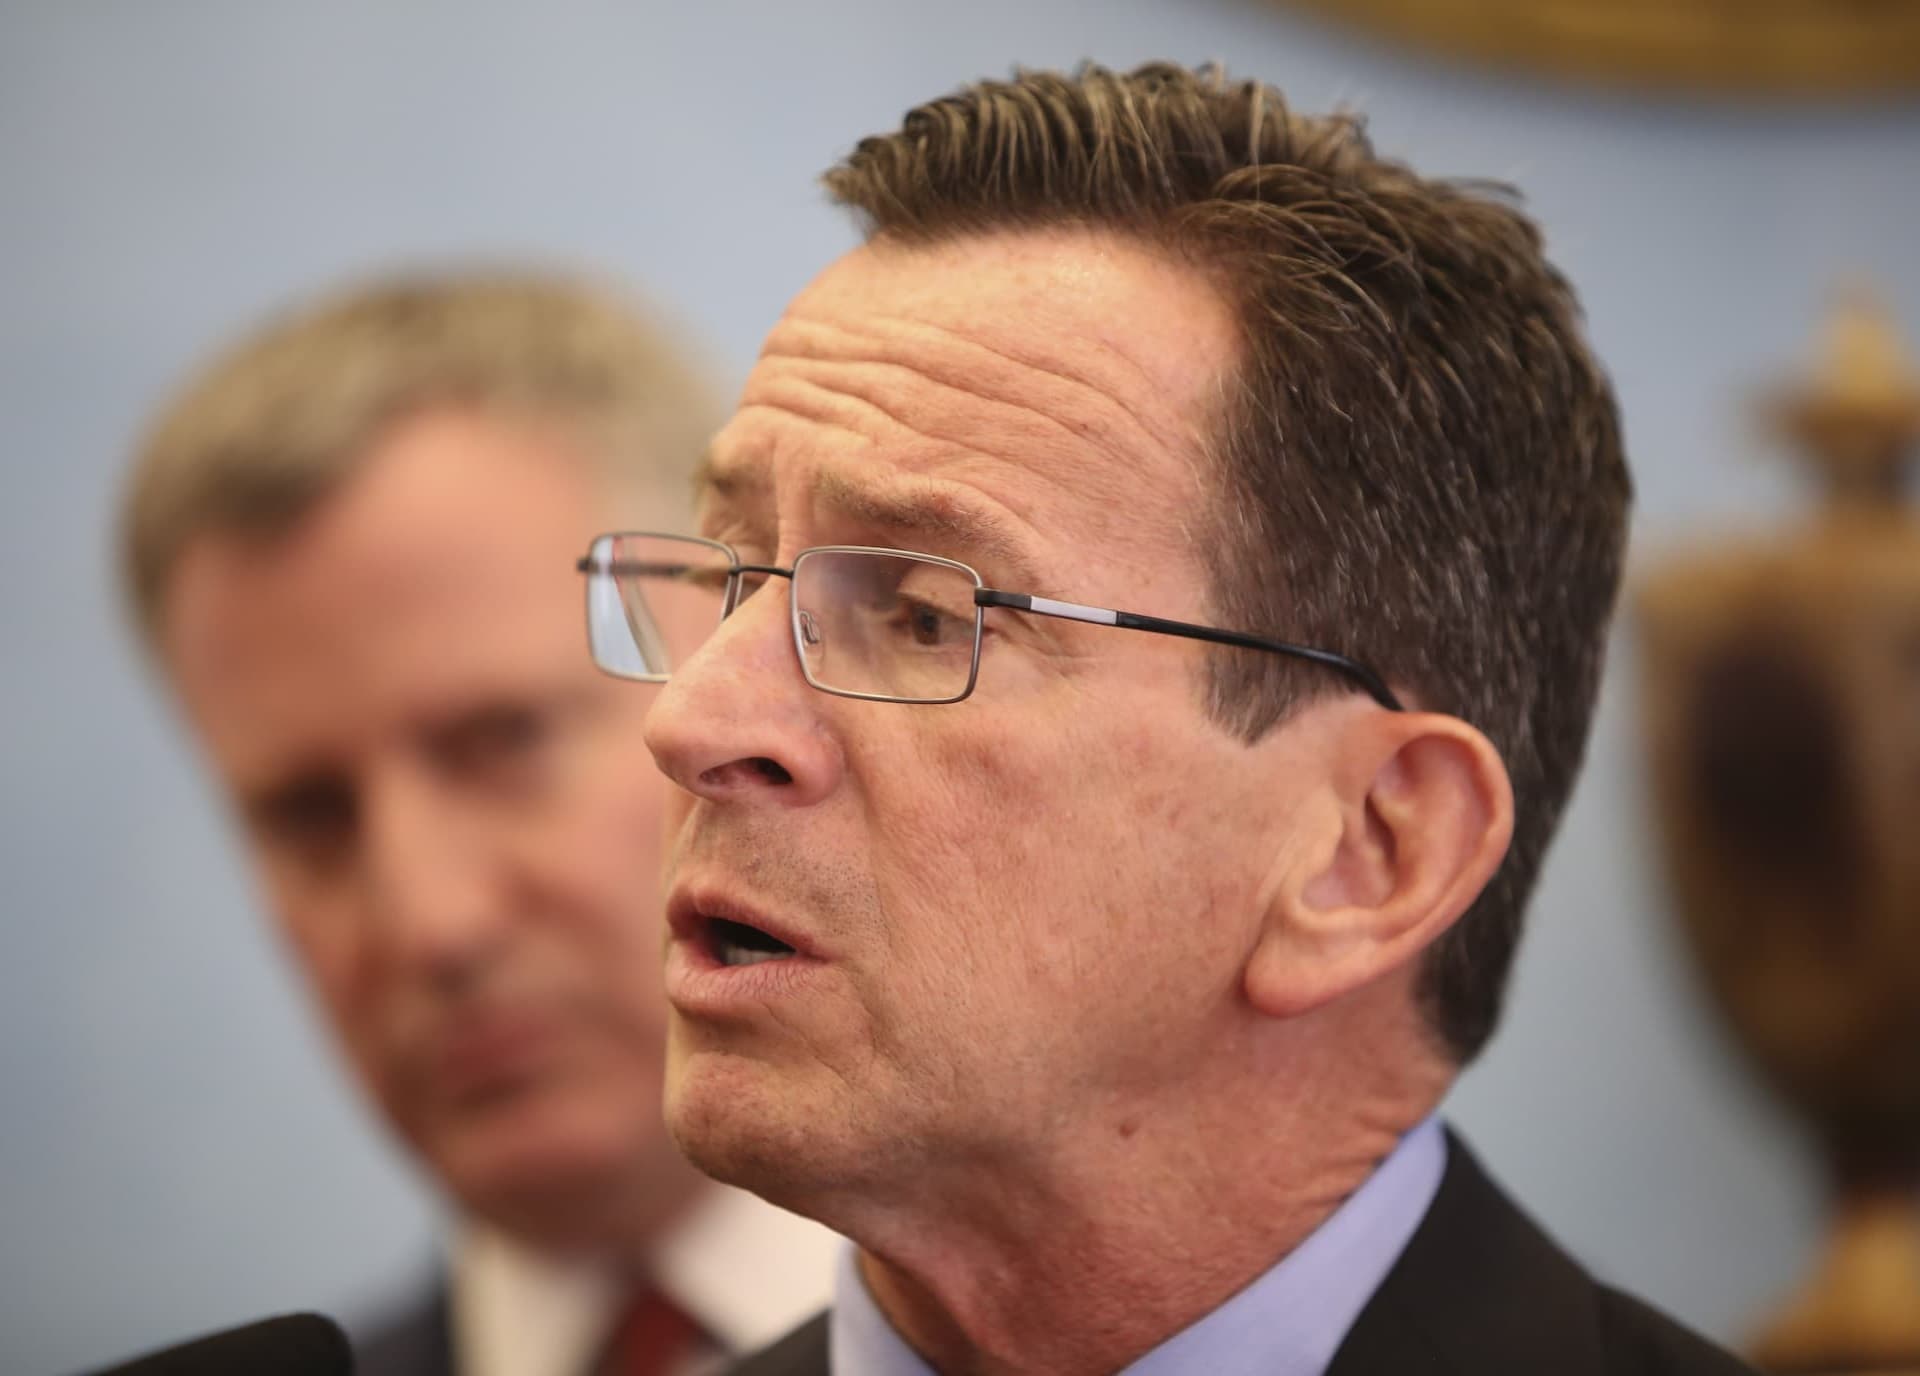 Gov. Malloy’s Retirement-for-All Protection for Securities Industry Stripped Out in Budget Agreement